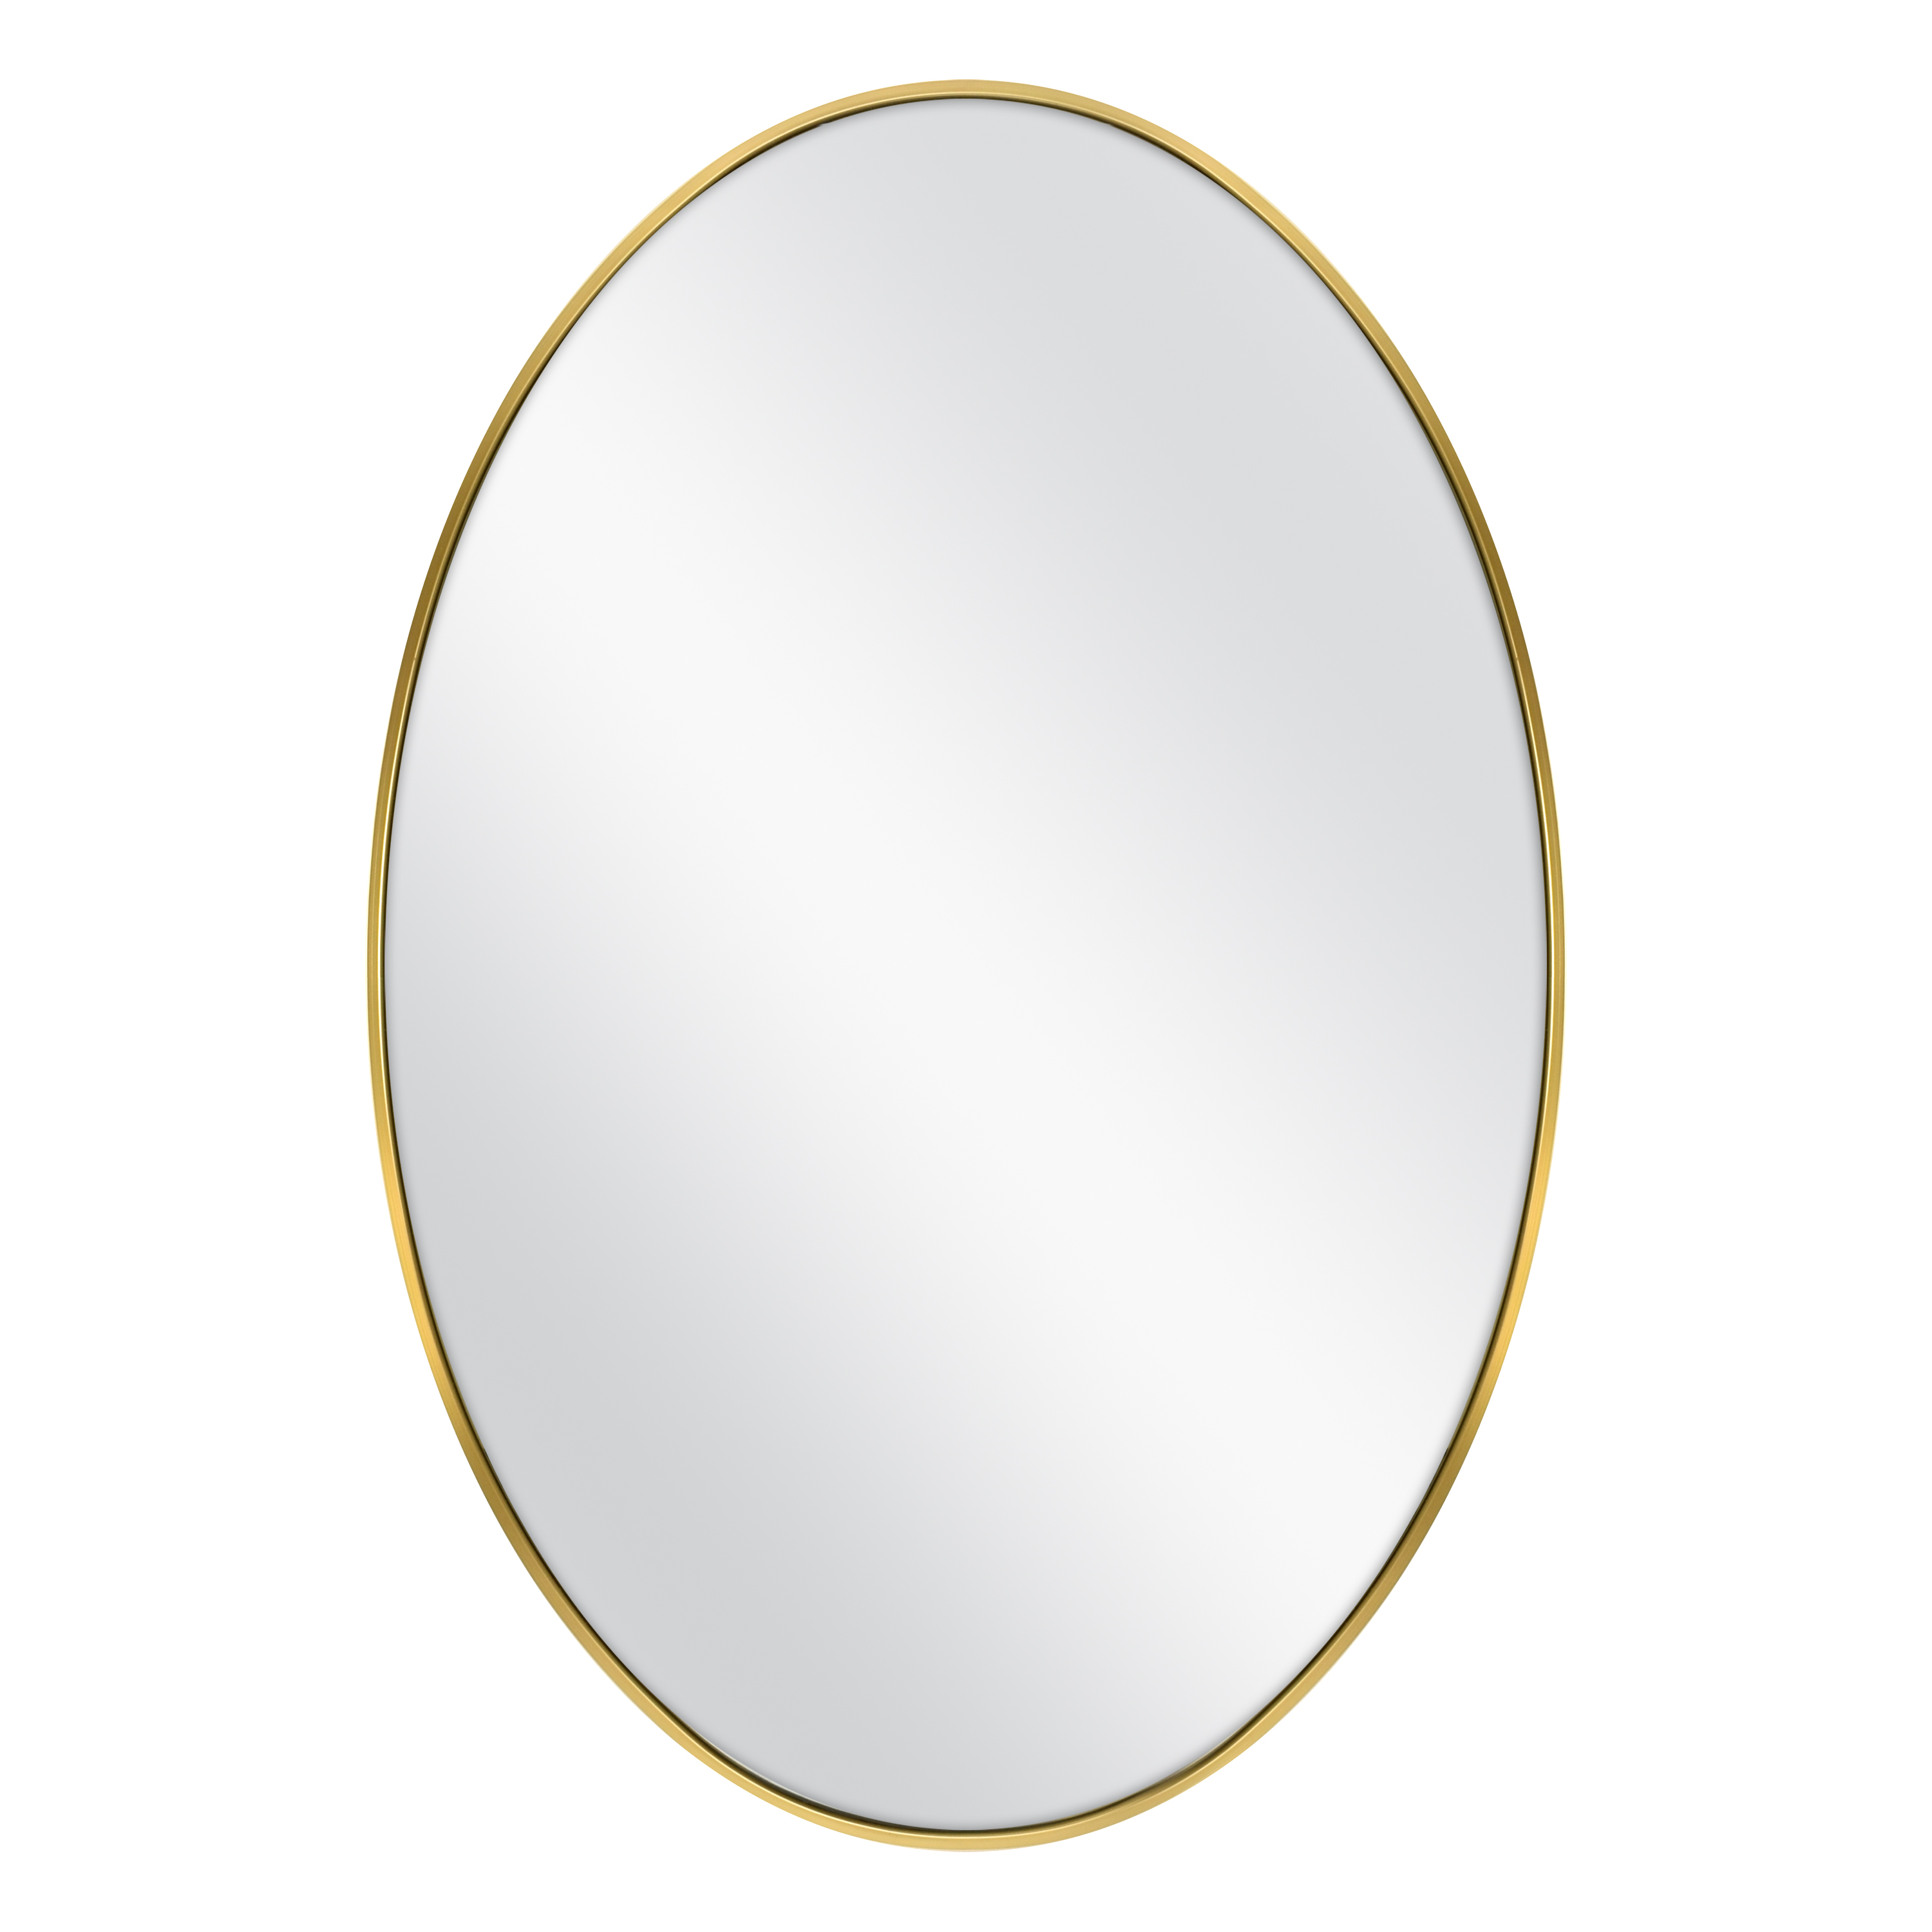 Oval Metal Wall Mirror by Drew Barrymore Flower Home - image 1 of 6